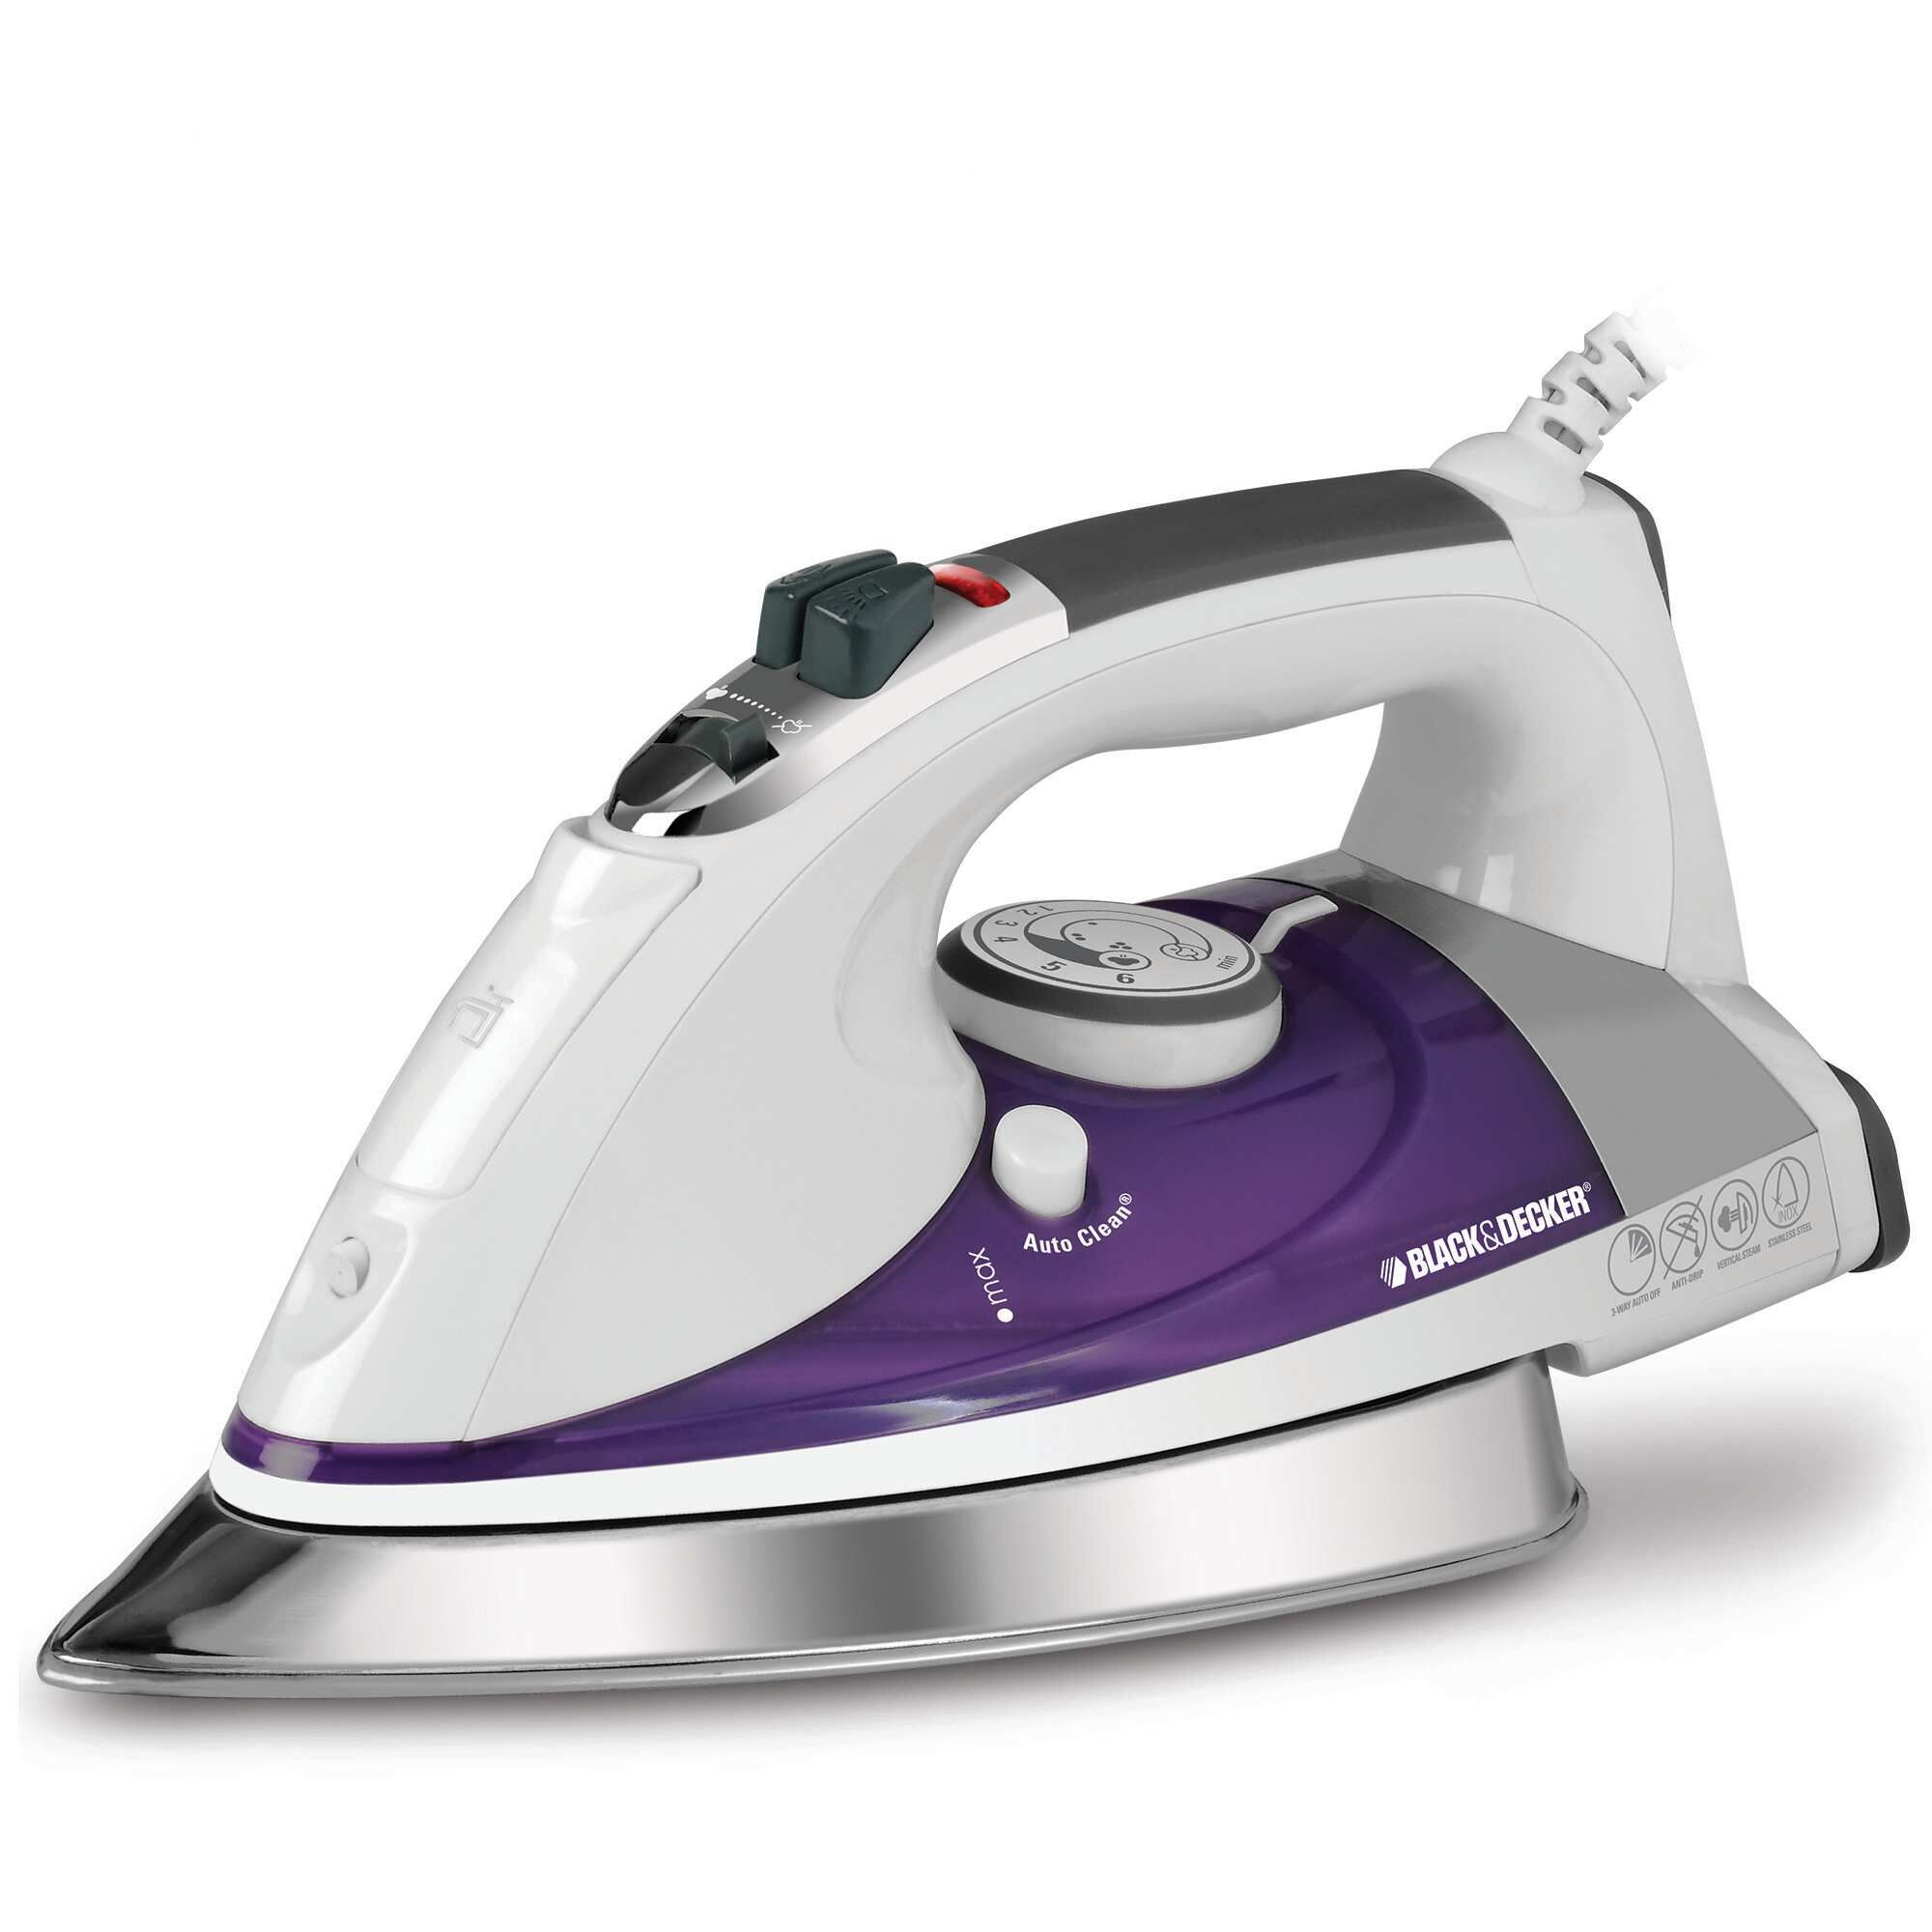 BLACK and DECKER Steam iron with Extra Large Soleplate.